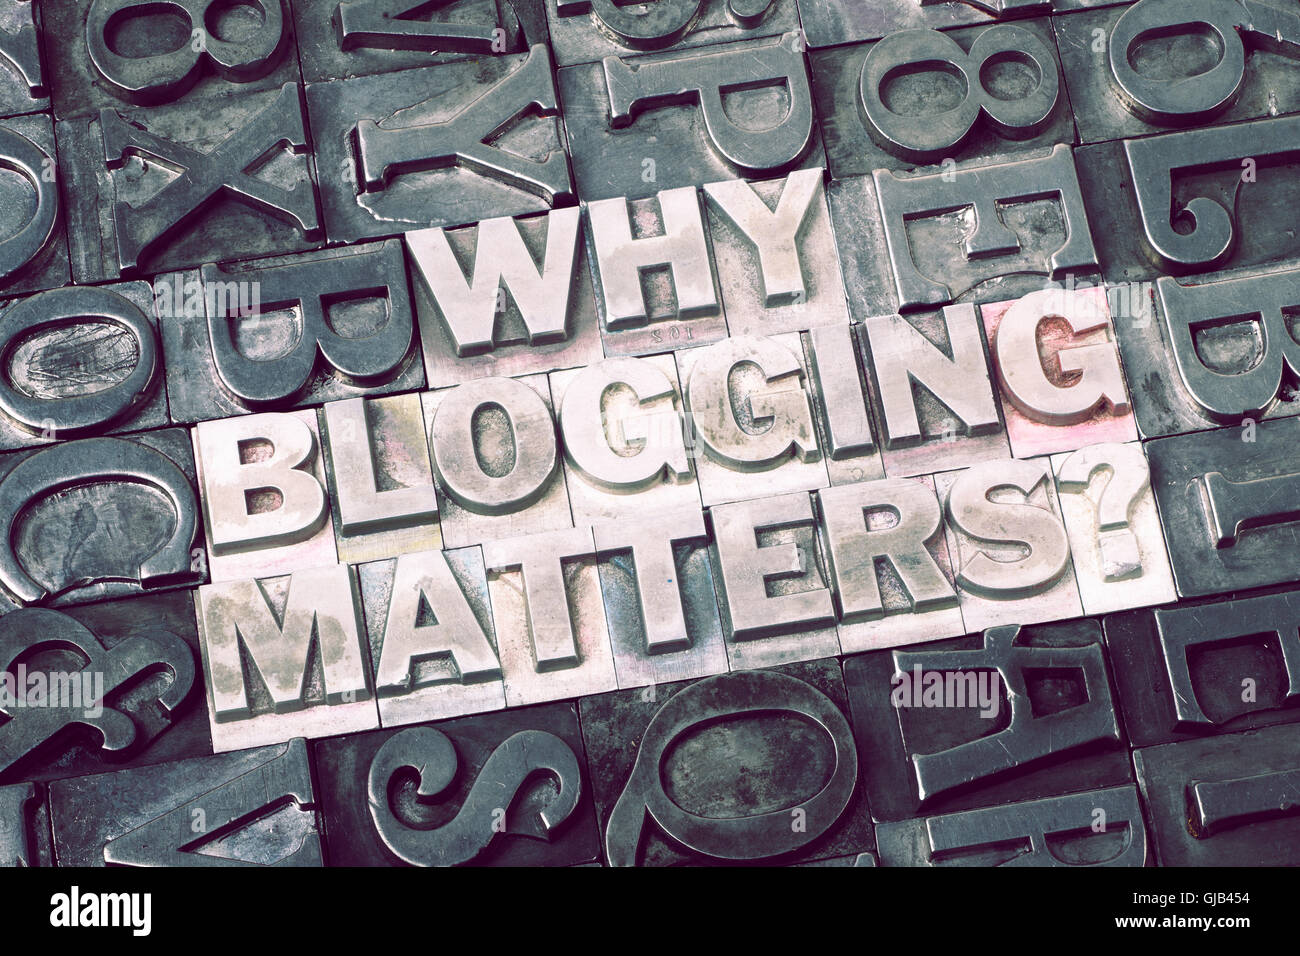 why blogging matters question made from metallic letterpress blocks with dark letters background Stock Photo